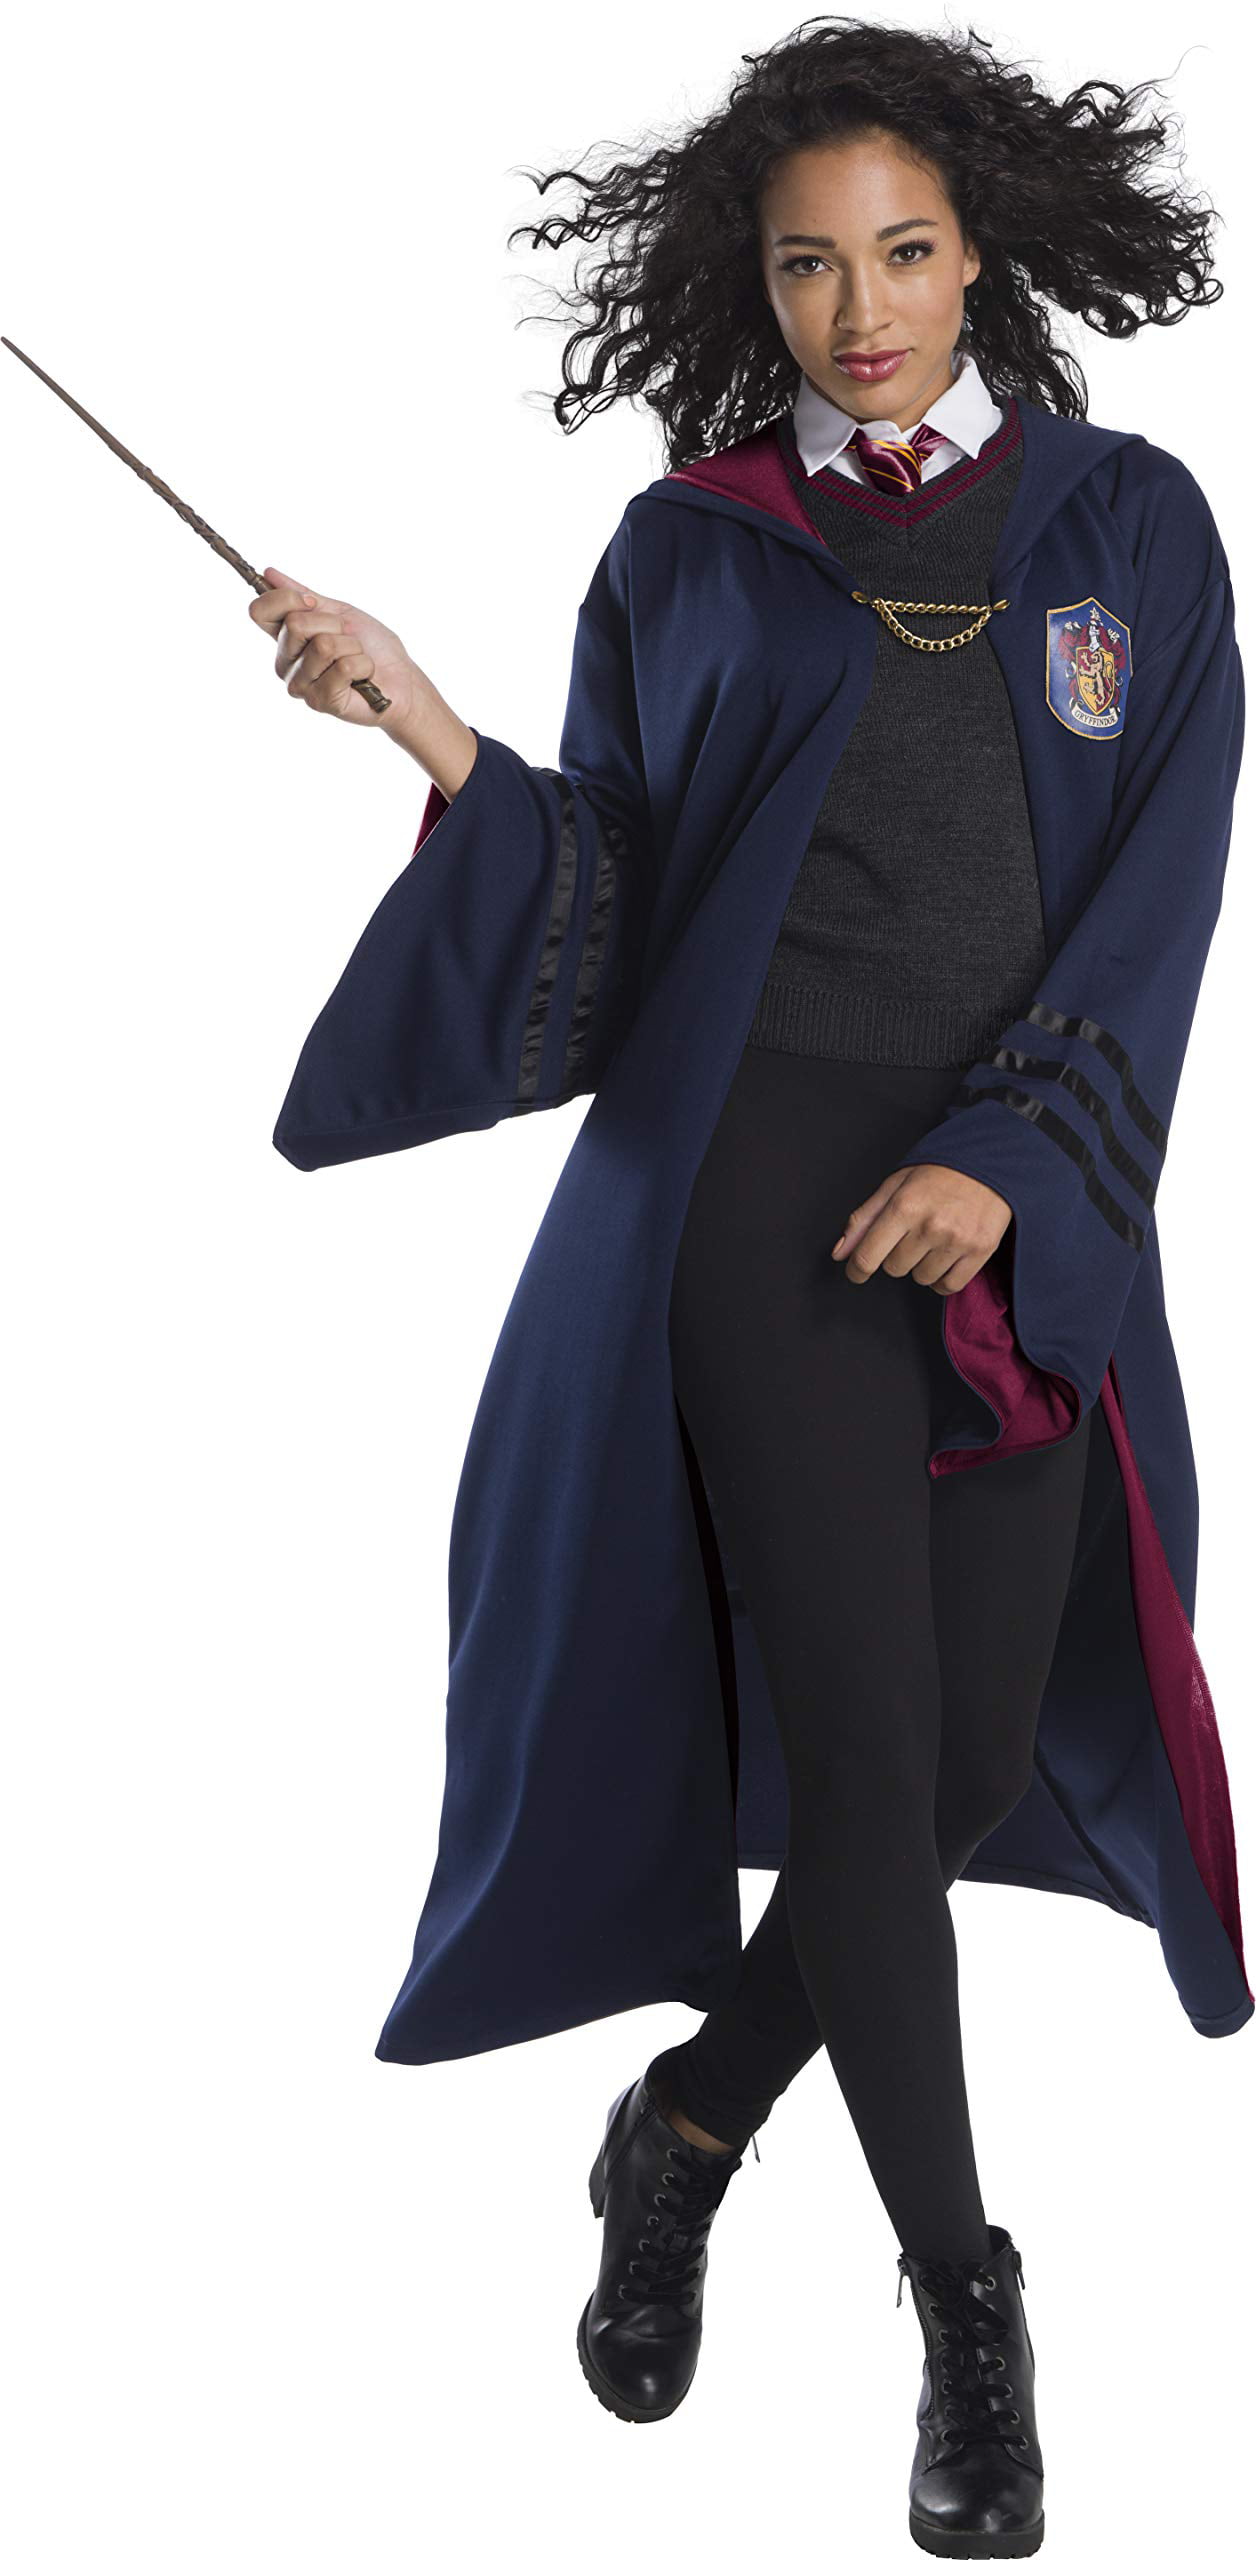 Funidelia  Harry Potter Costume for men and women Wizards, Gryffindor,  Hogwarts - Costume for adults, accessory fancy dress & props for Halloween,  carnival & parties - Size M - Black 